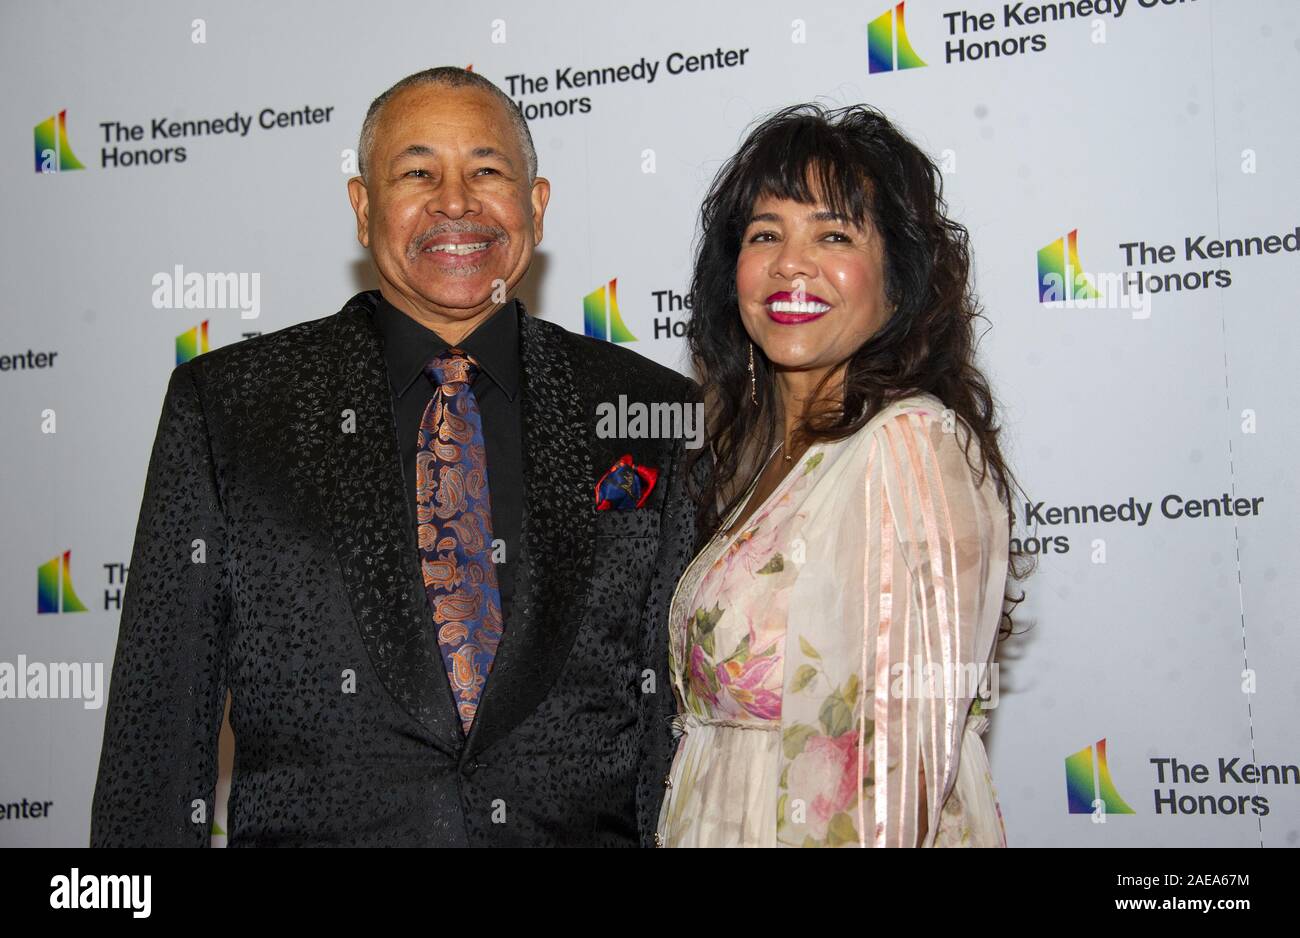 Washington, USA. 07th Dec, 2019. Percussionist Ralph Johnson of Earth, Wind and Fire and his wife, Susan Johnson, arrive for the formal Artist's Dinner honoring the recipients of the 42nd Annual Kennedy Center Honors at the USA Department of State in Washington, DC on Saturday, December 7, 2019. The 2019 honorees are: Earth, Wind & Fire, Sally Field, Linda Ronstadt, Sesame Street, and Michael Tilson Thomas. Photo by Ron Sachs/UPI Credit: UPI/Alamy Live News Stock Photo